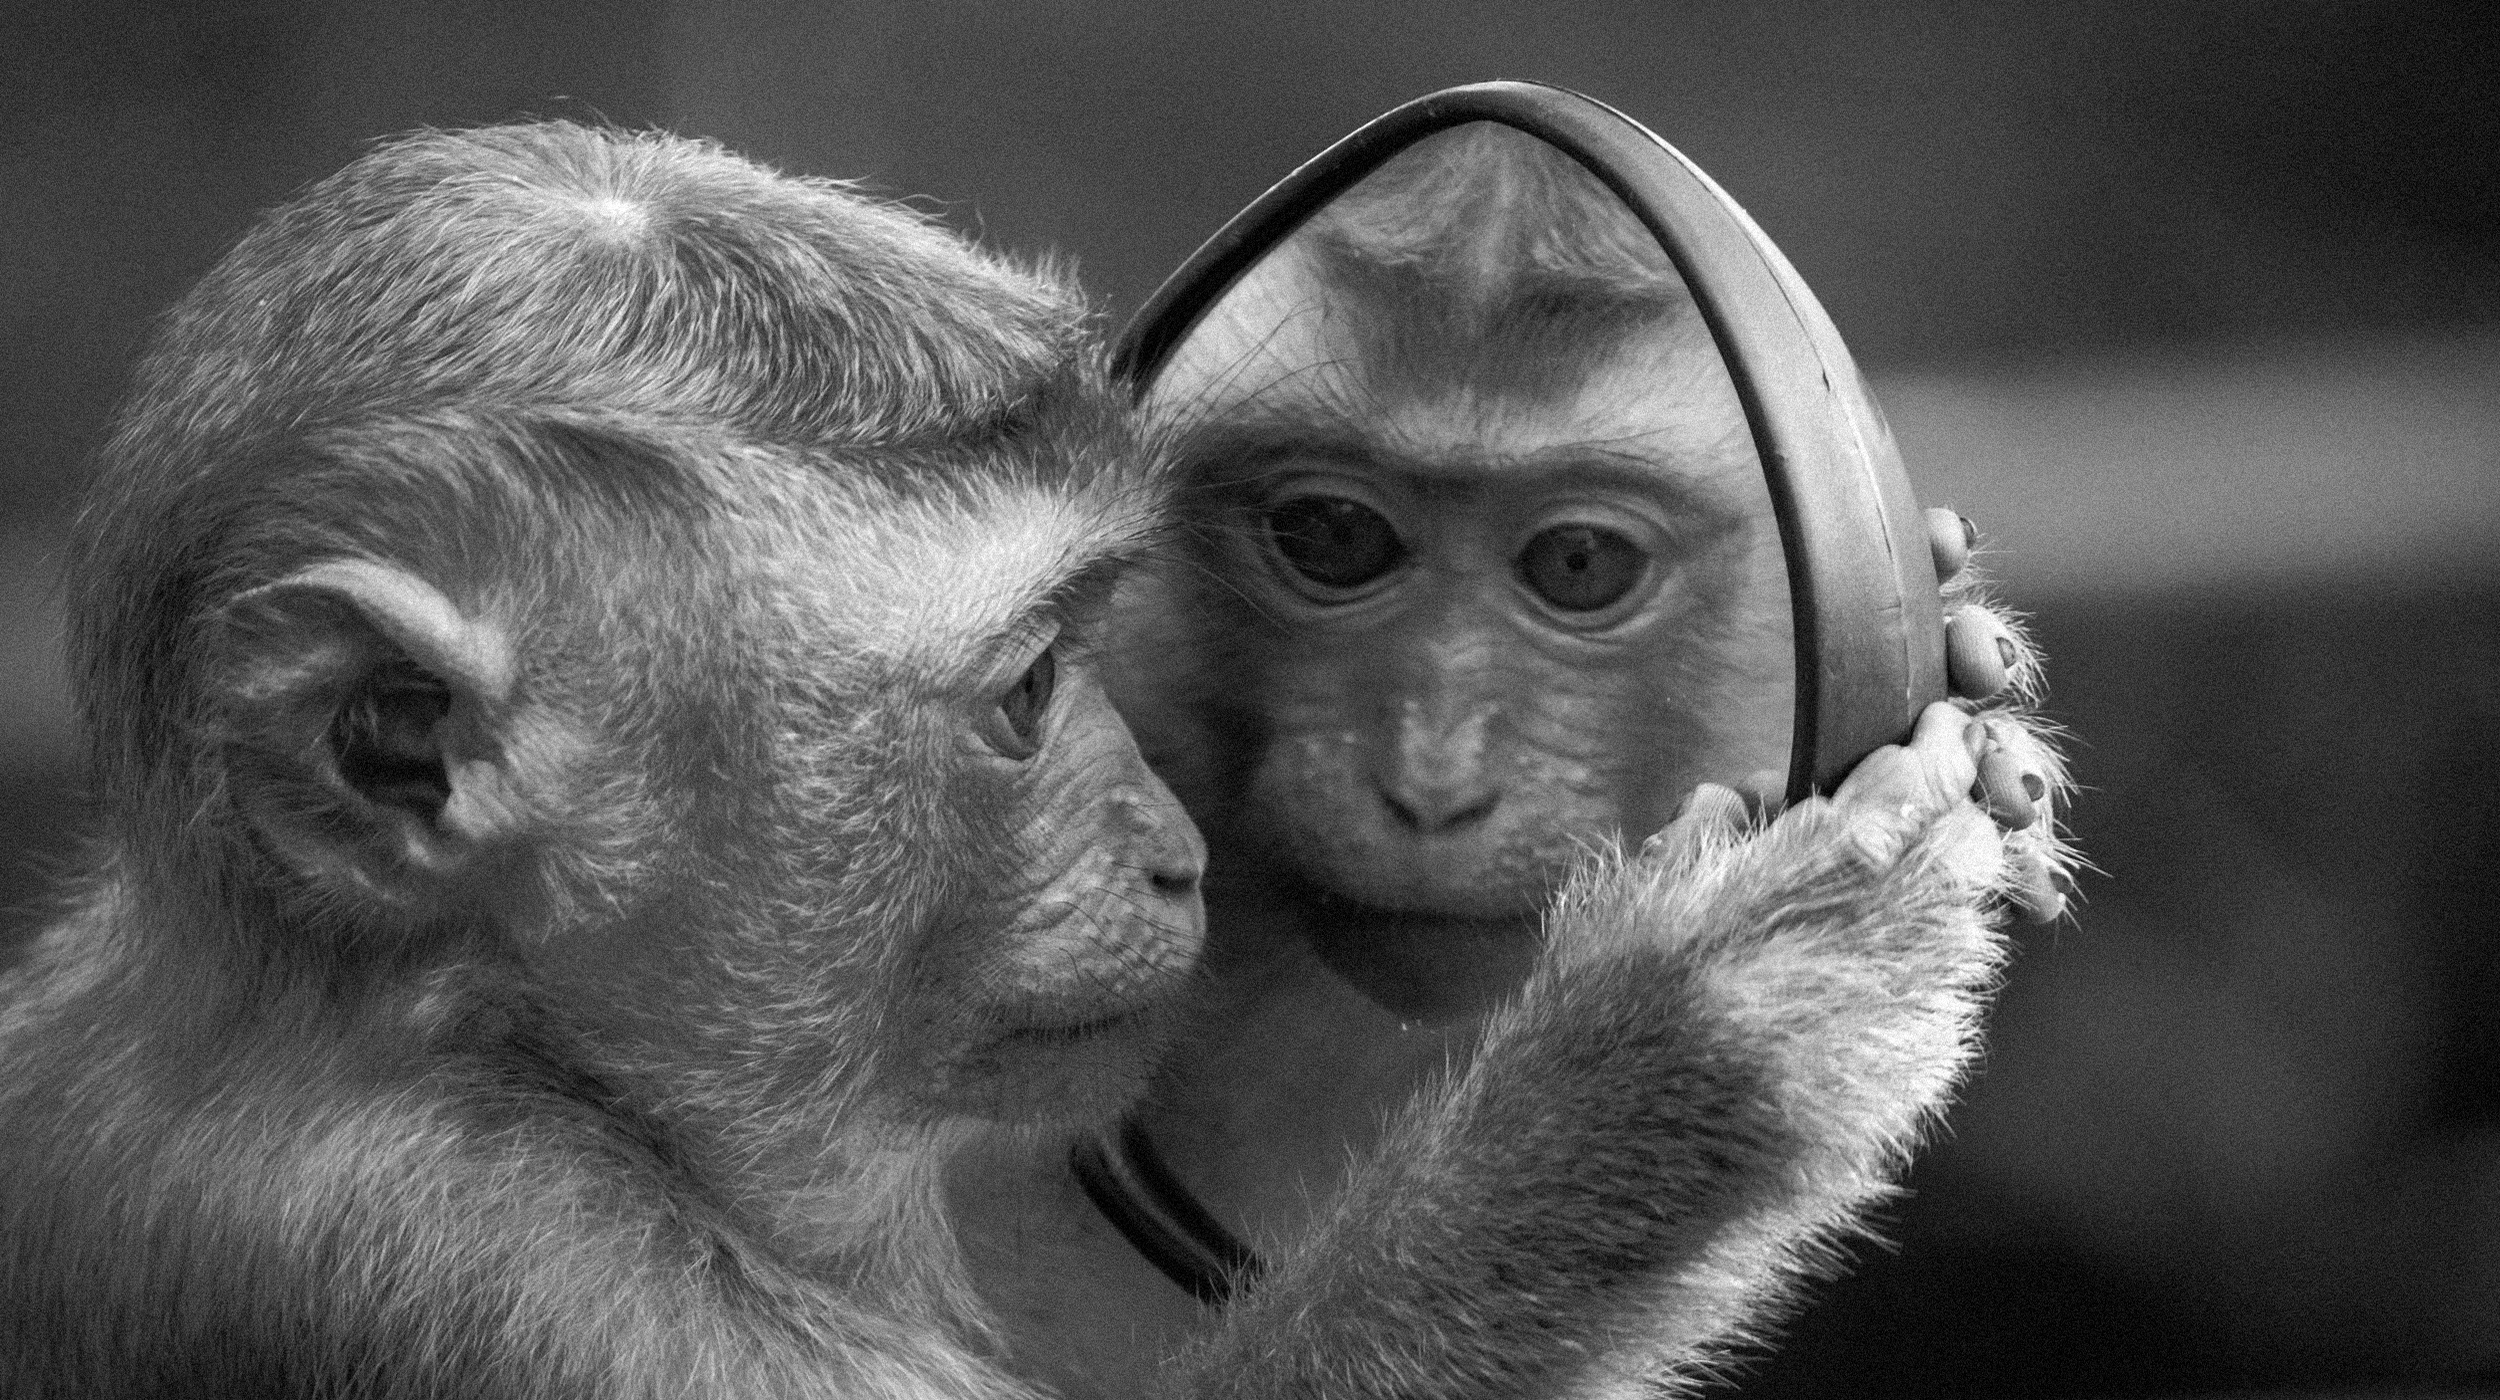 Monkeys are Smarter Than We Thought